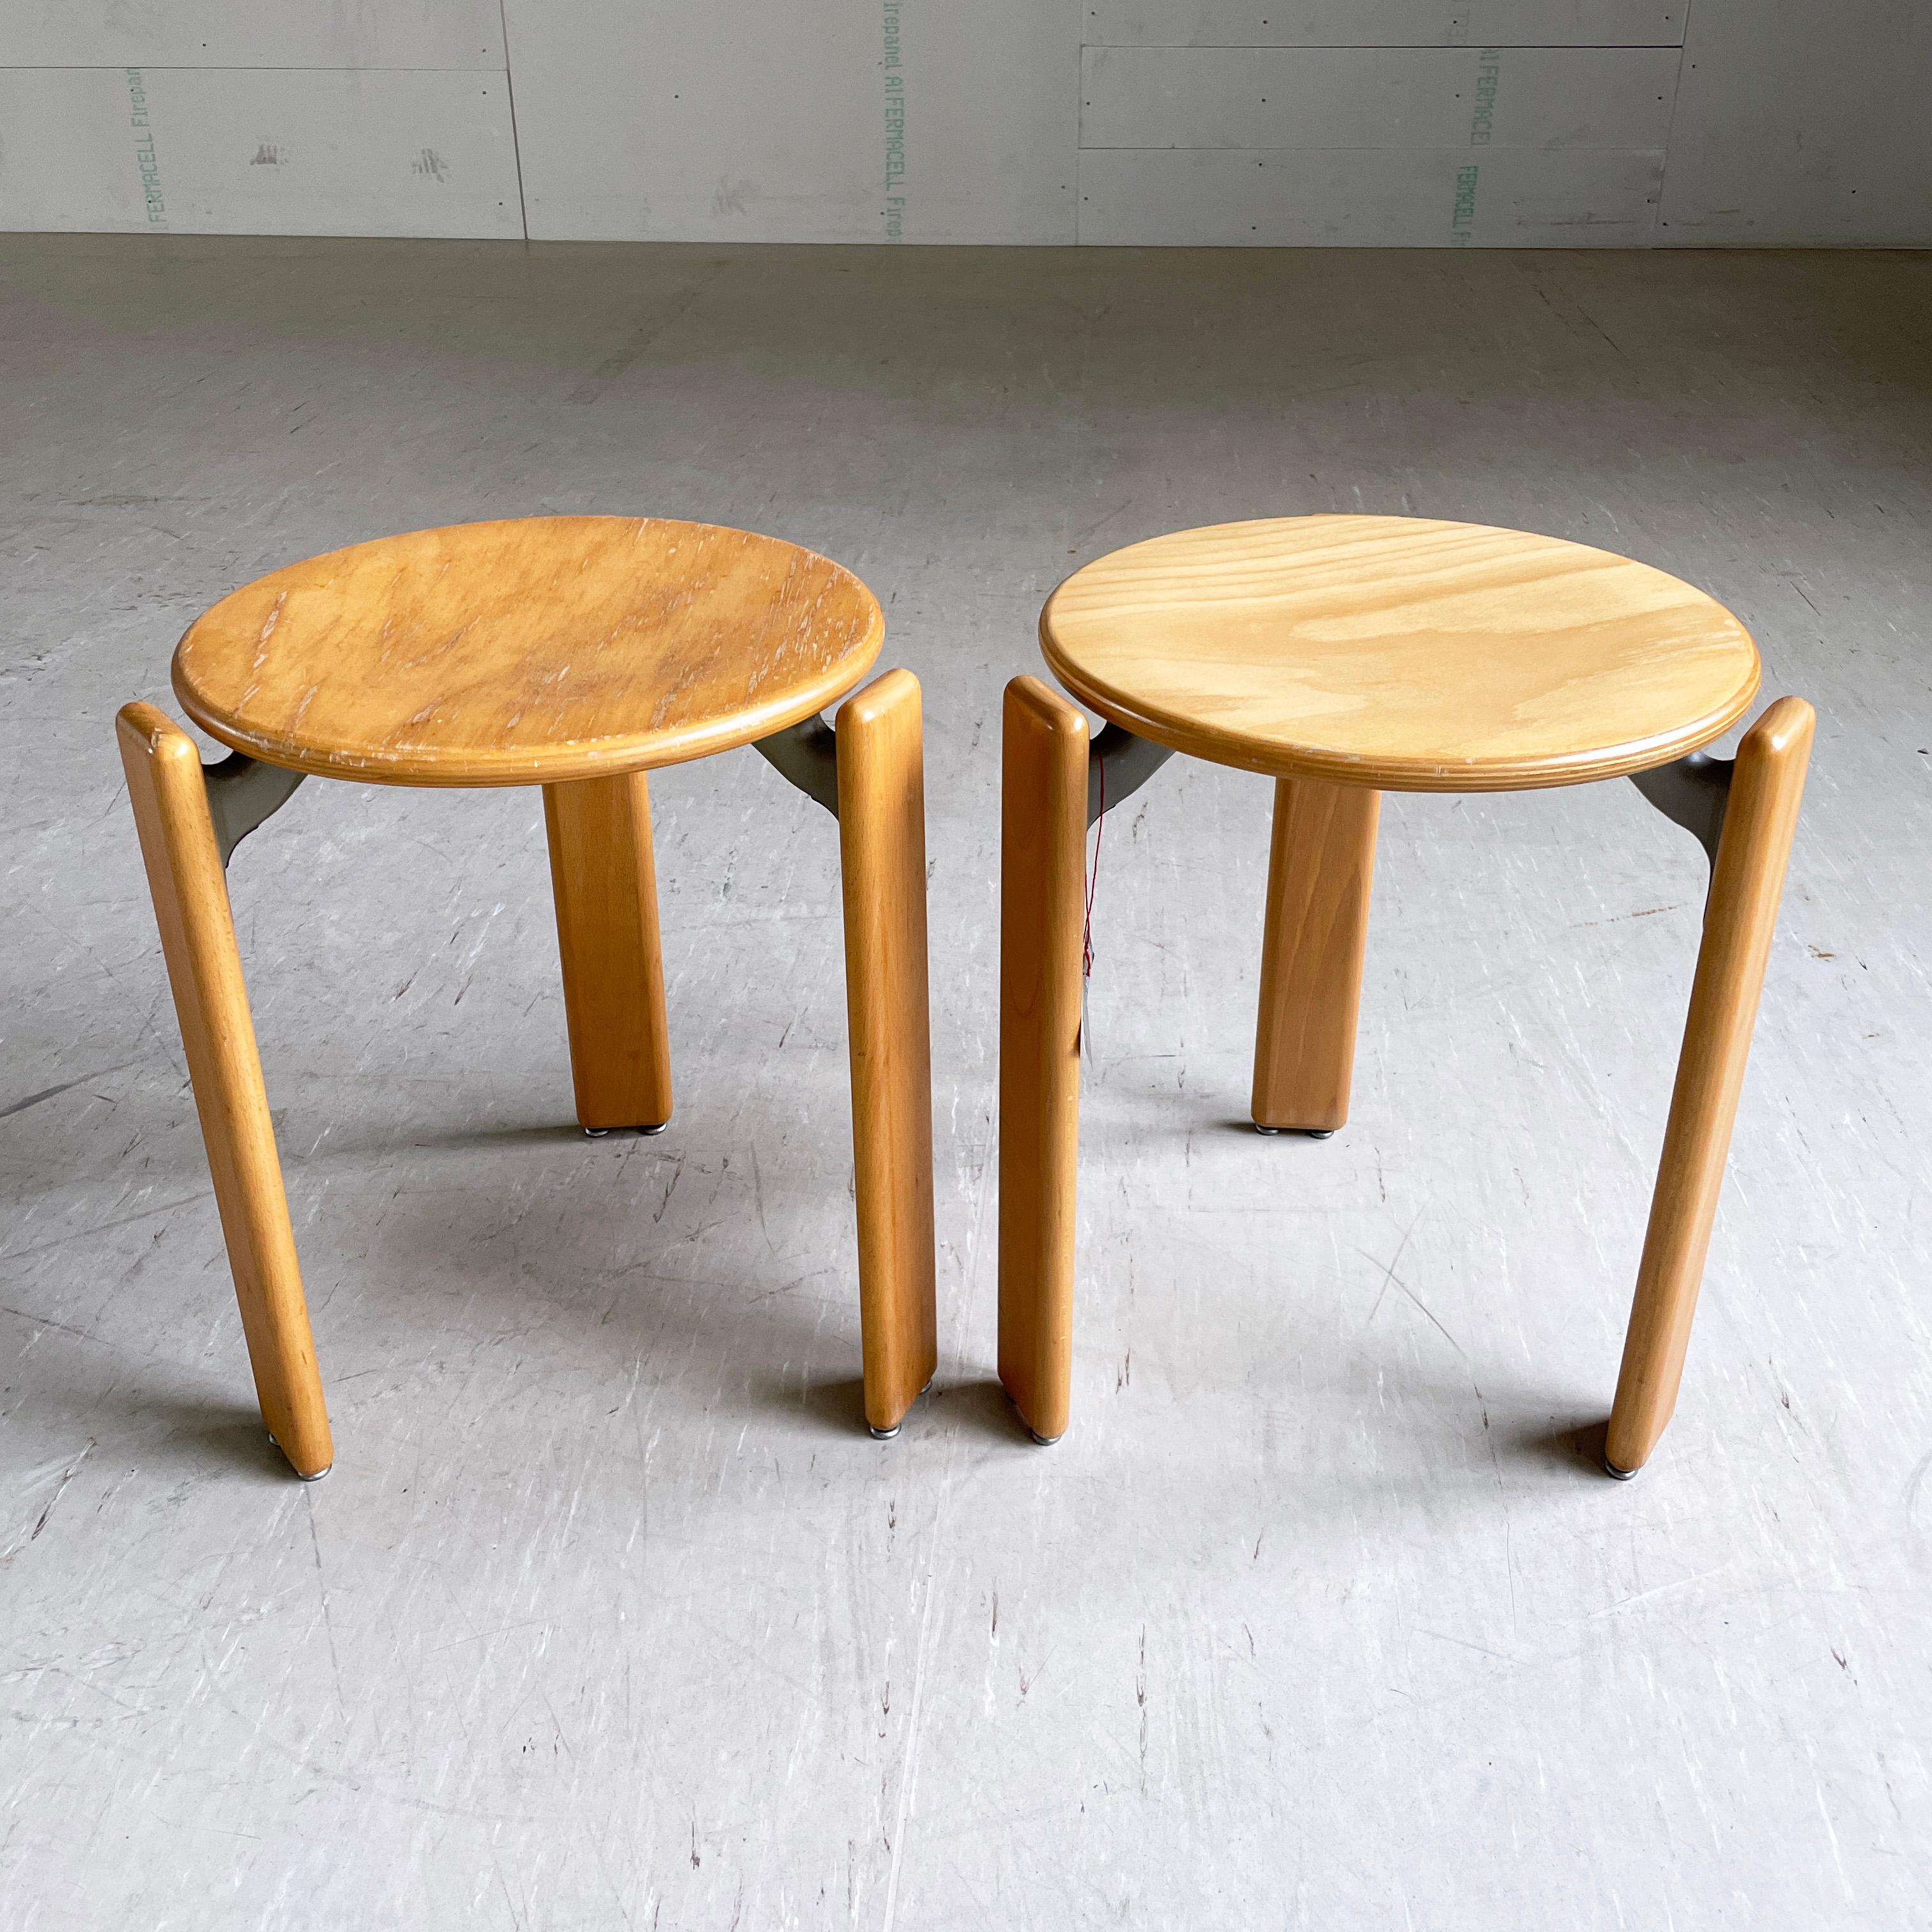 Pair of stackable stools designed by Bruno Rey, 1971. Made of solid beech. Iconic Swiss design. Produced by Dietiker, Switzerland. 
Stackable for easy storage and space saving. These also make very stylish indoor plant stands.
Water mark to one of